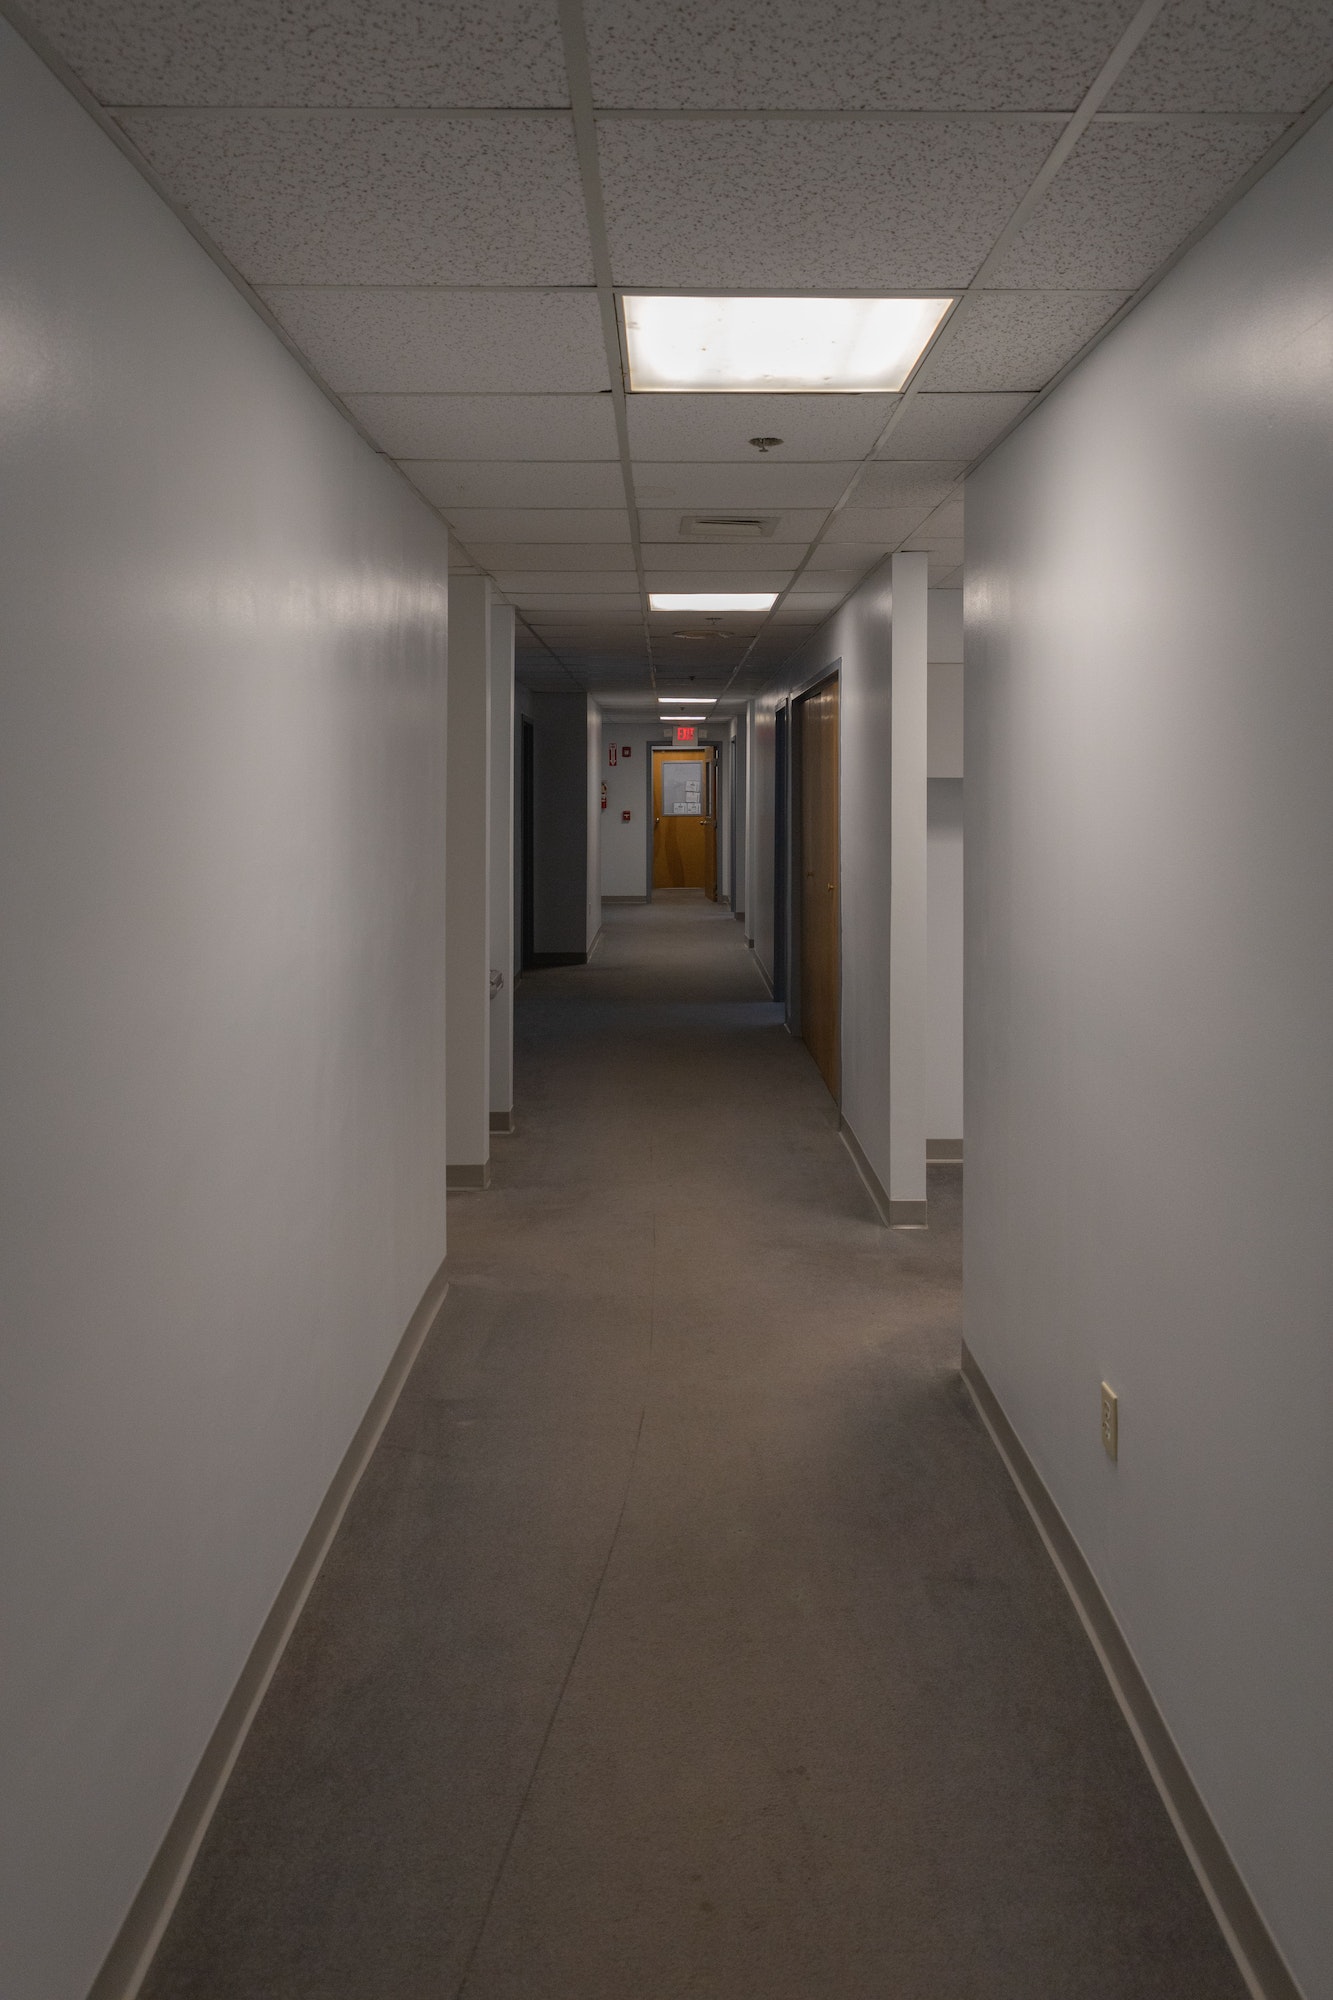 Office hallway in a commercial building